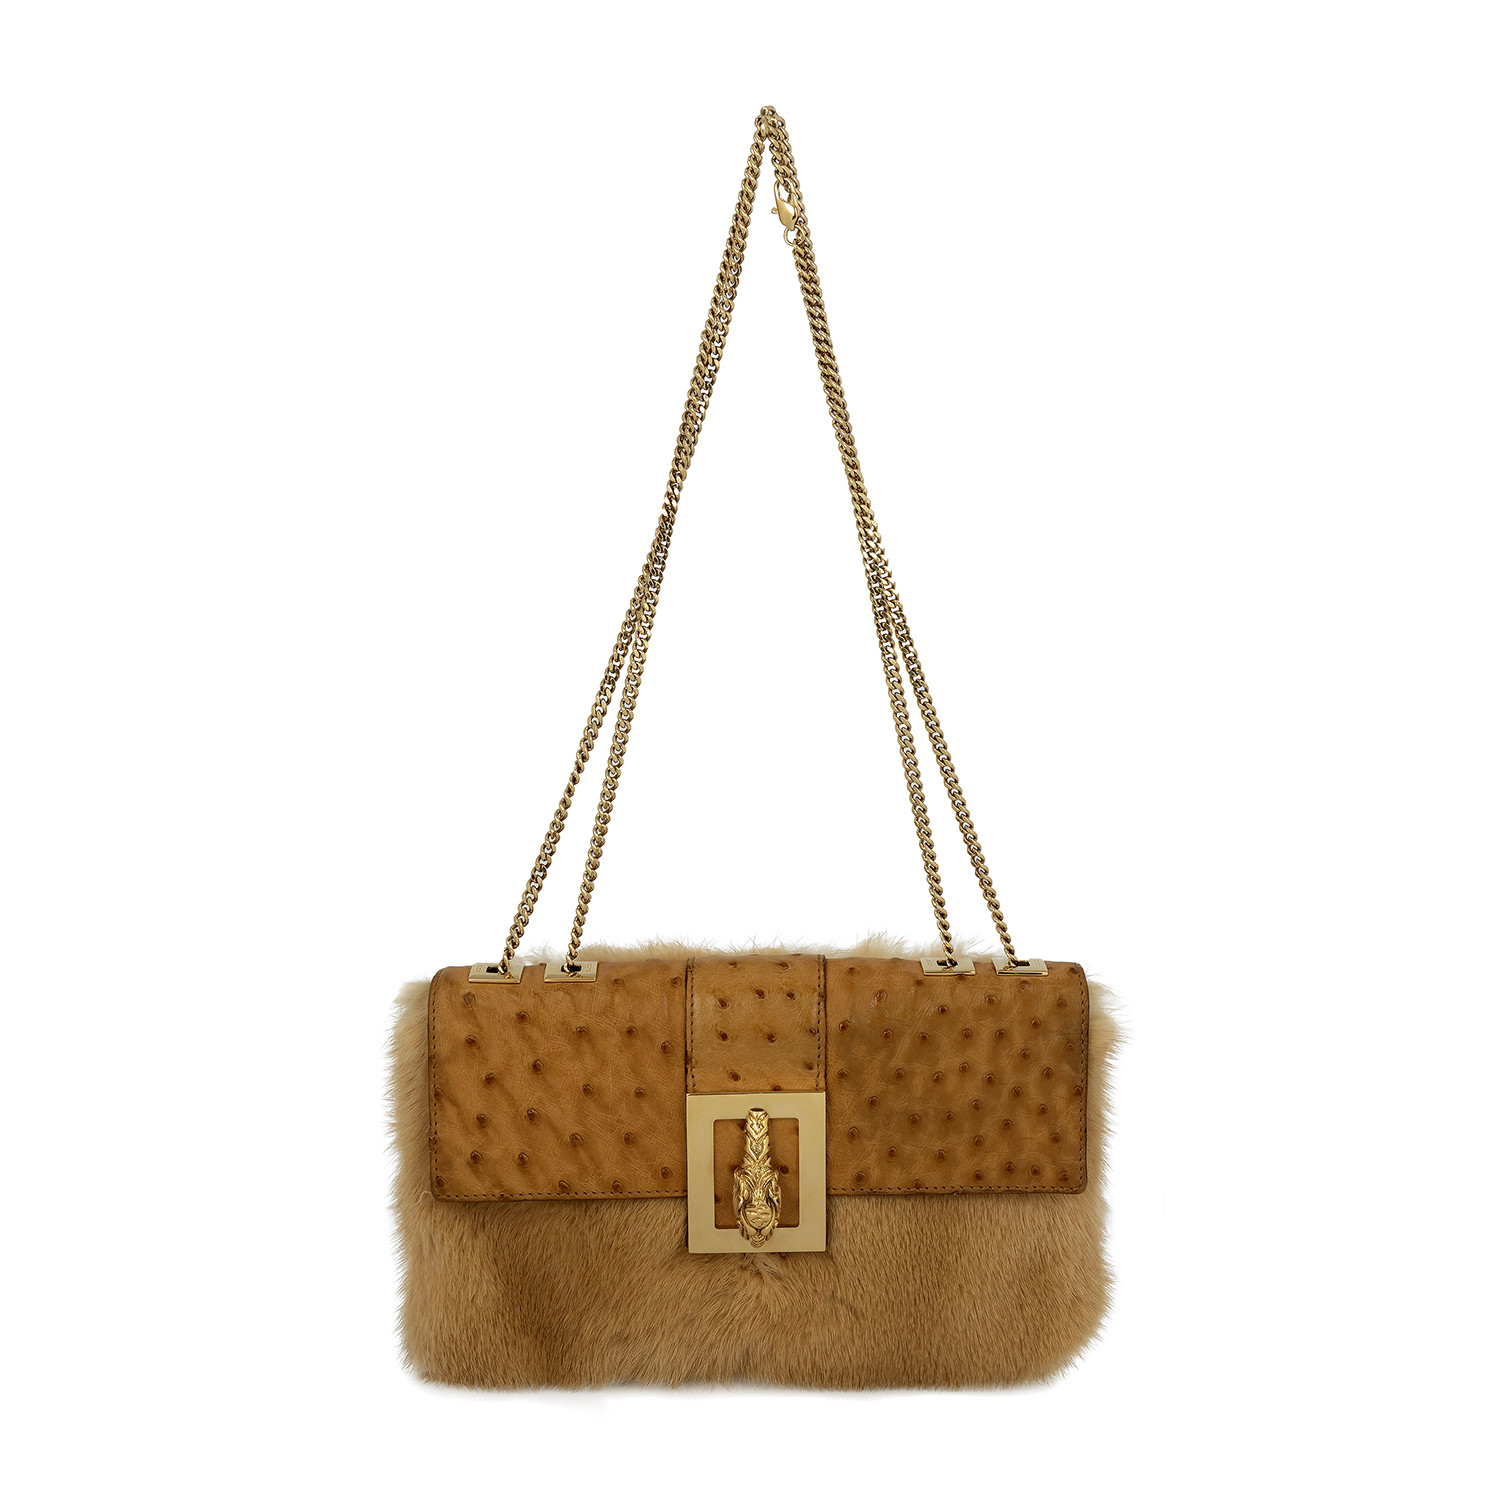 Gucci // Gold Panther Fur Leather Bag // Pre-Owned - Pre-Owned Designer Bags & Accessories ...